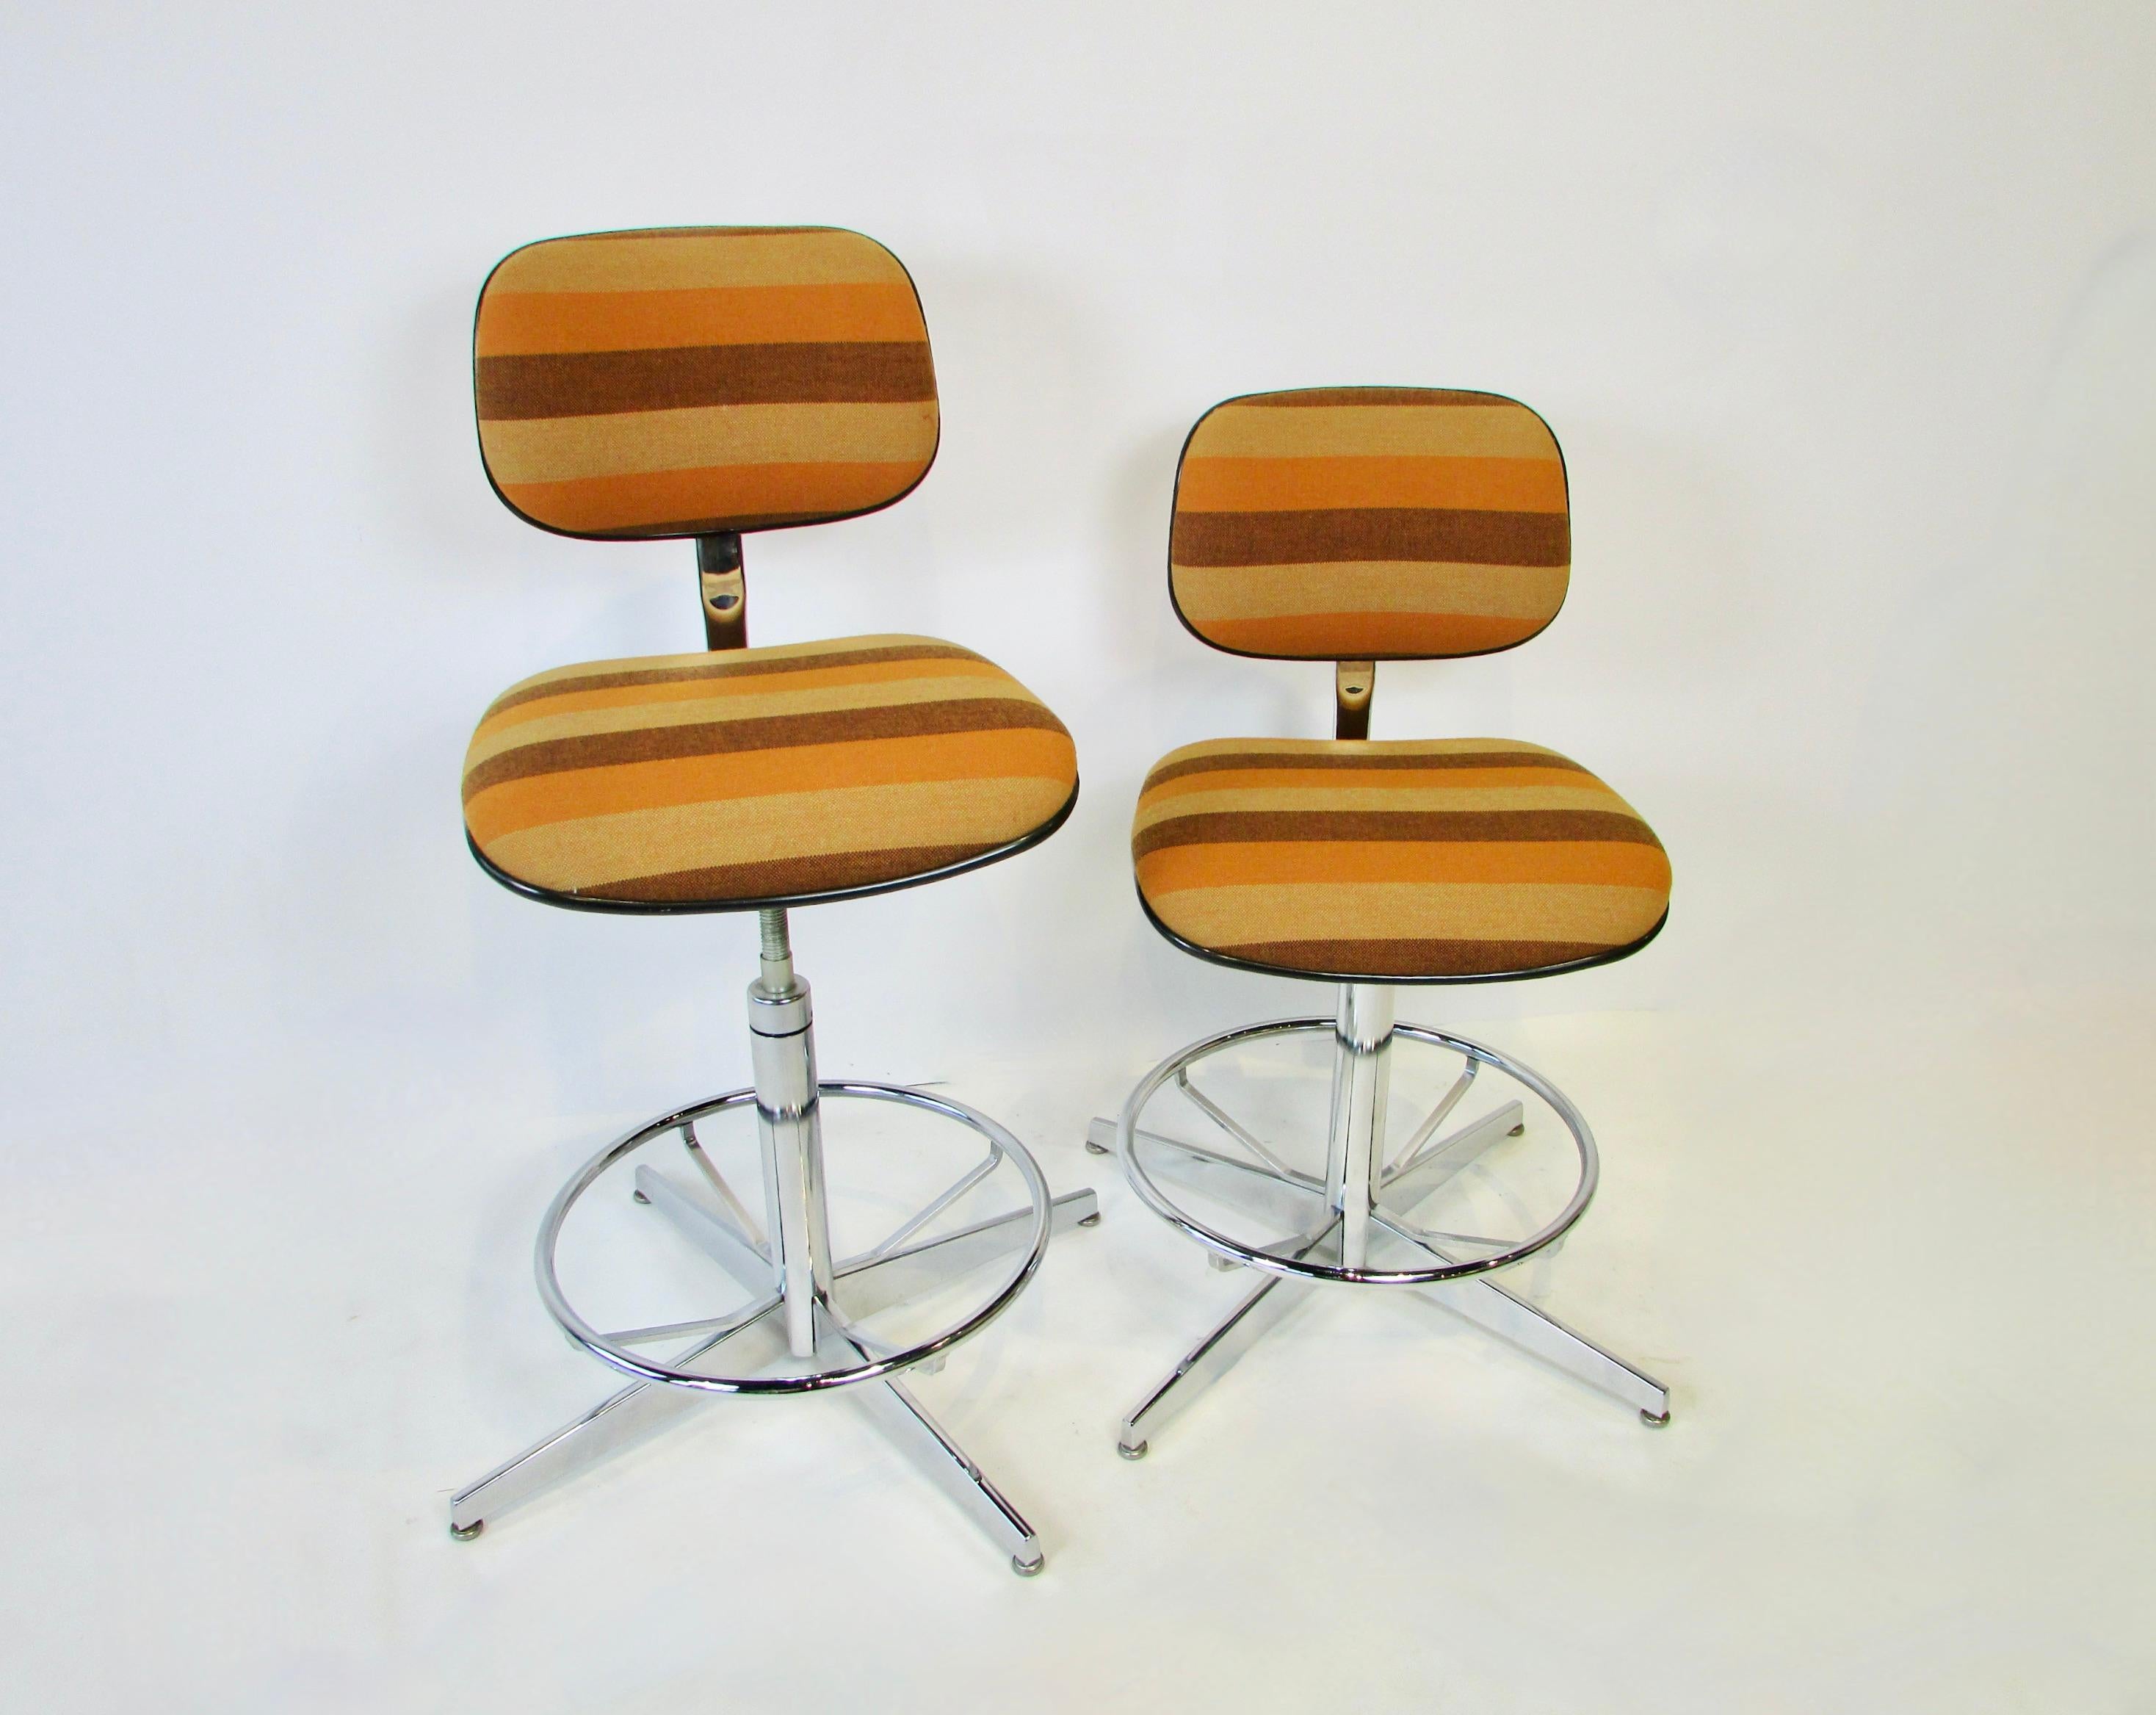 Pair of Steelcase co. adjustable operator bar counter stools. Upholstered in Alexander Girard attributed brown and gold striped textile. Excellent condition through out chrome and upholstery. Stools are multi adjustable. Seat height is listed at 35